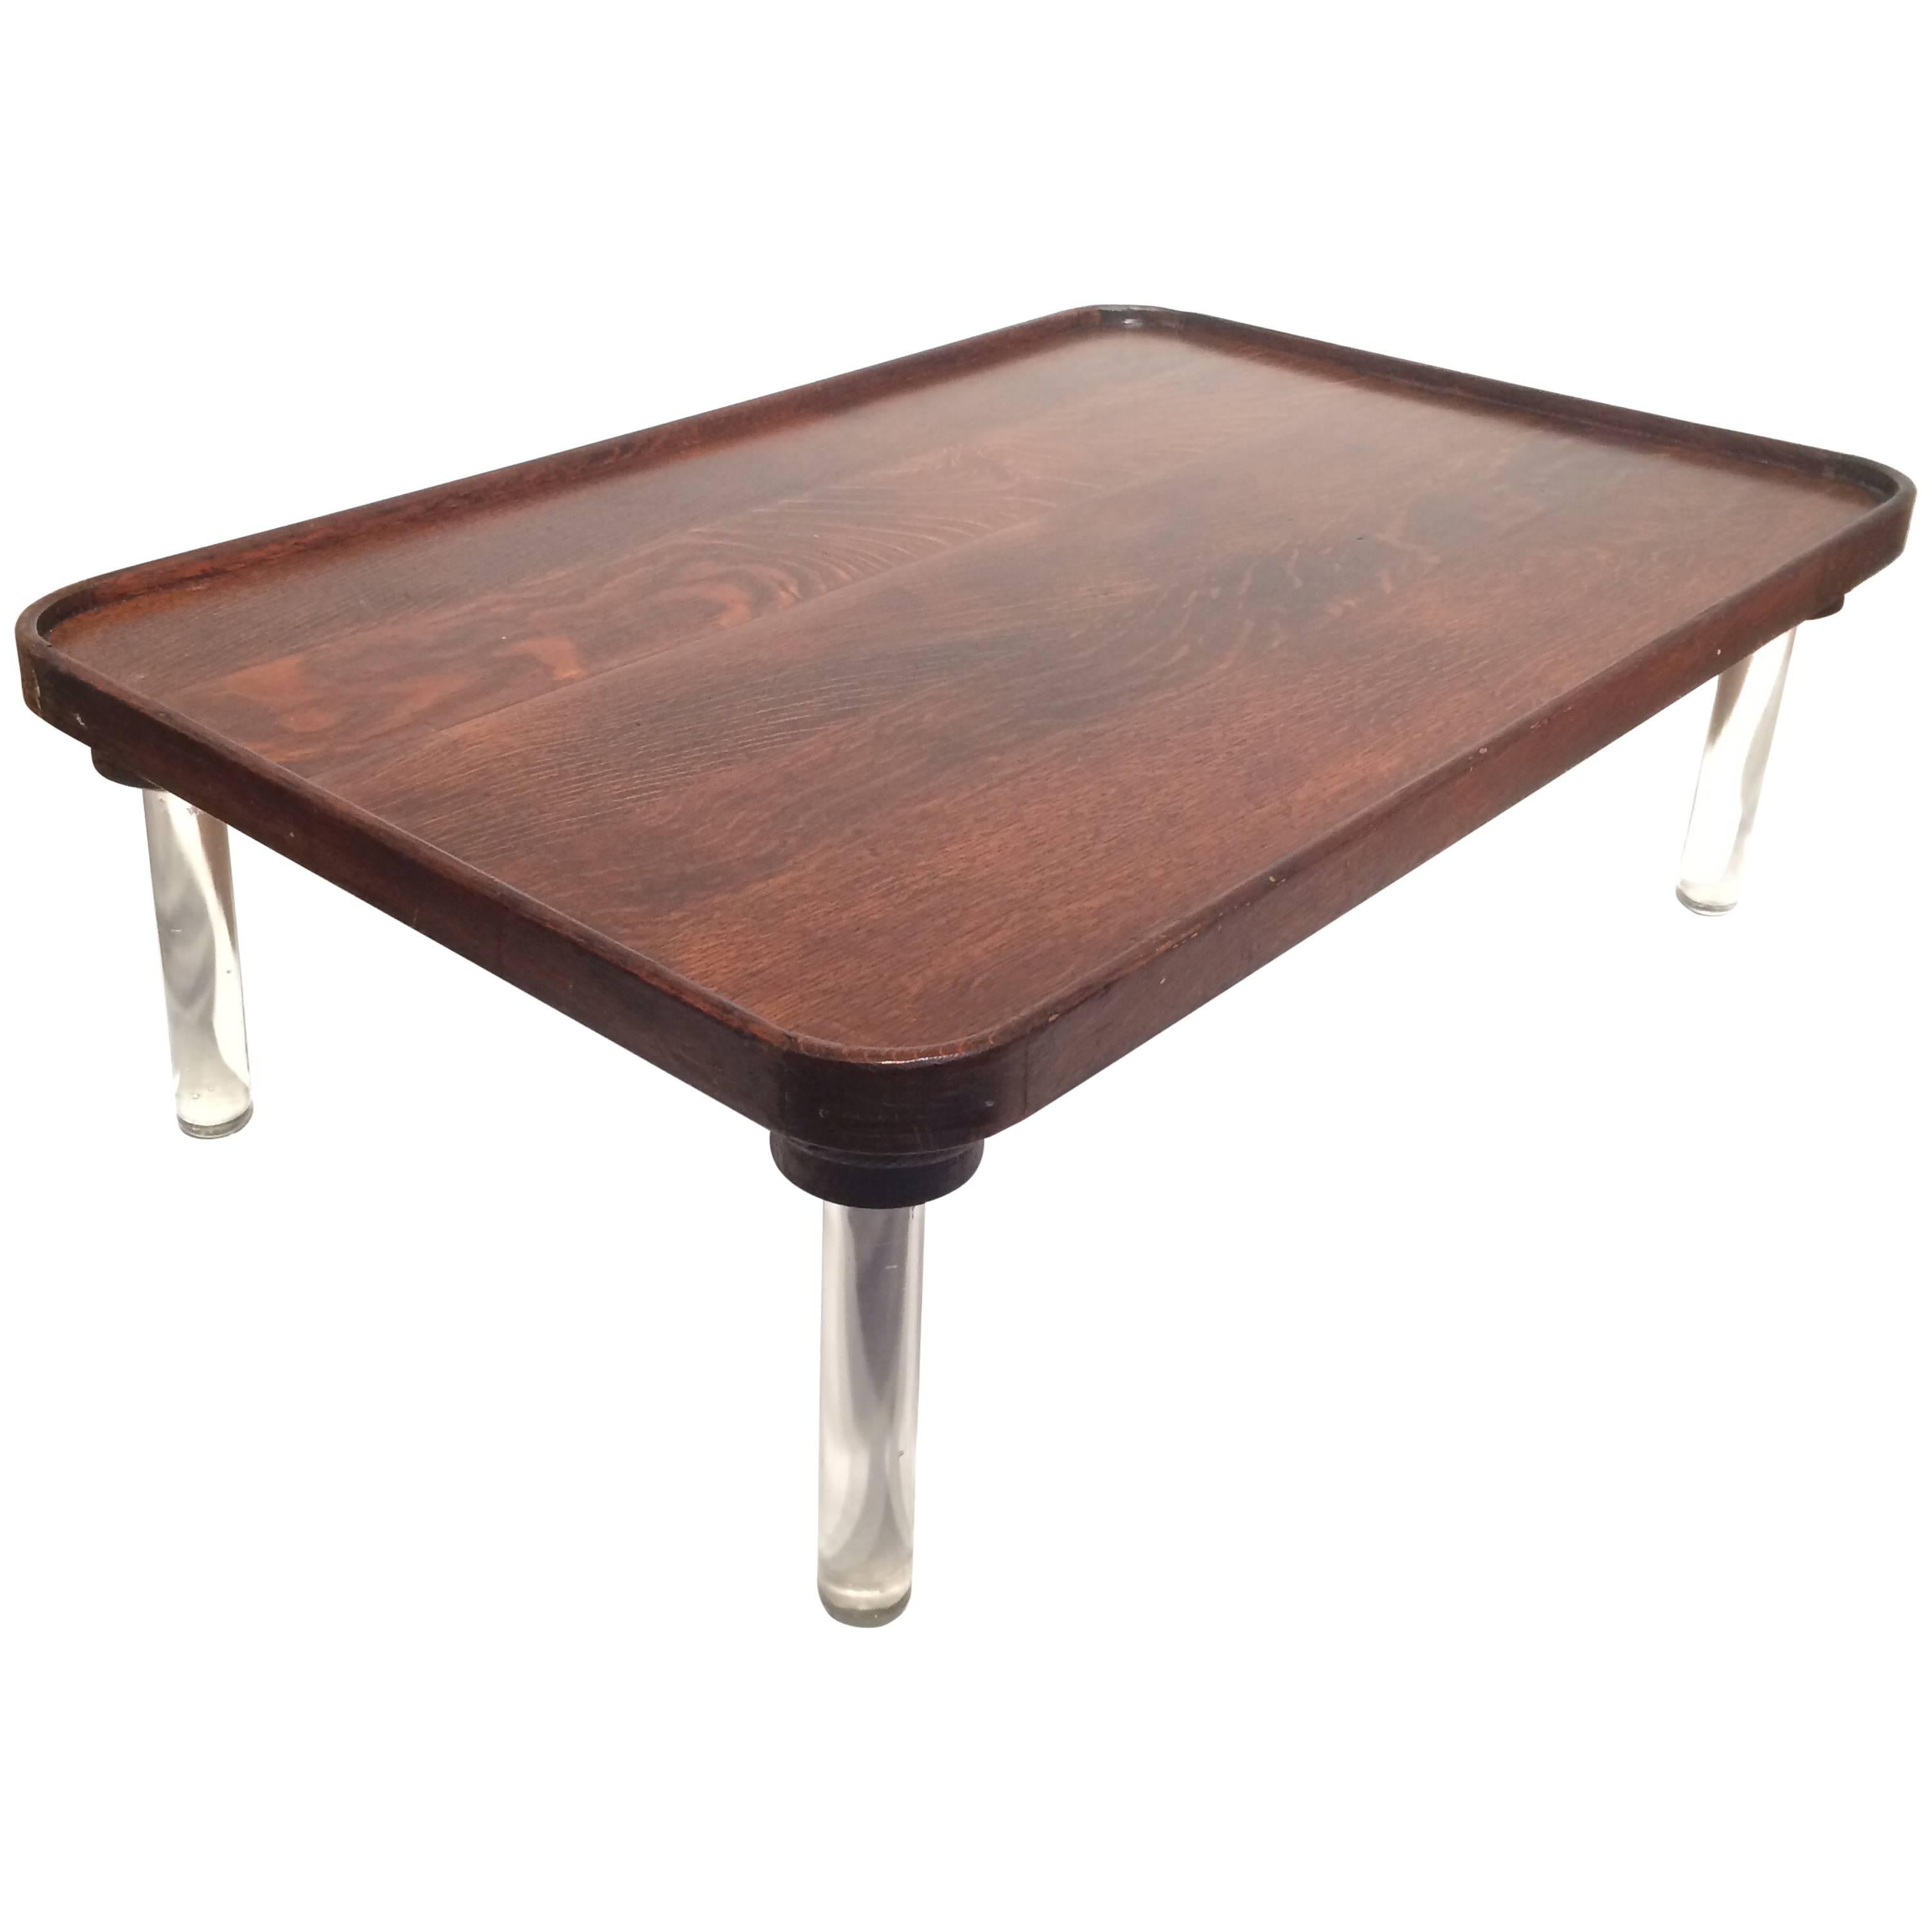 Tiger Oak Coffee Table With Glass Legs, 1945